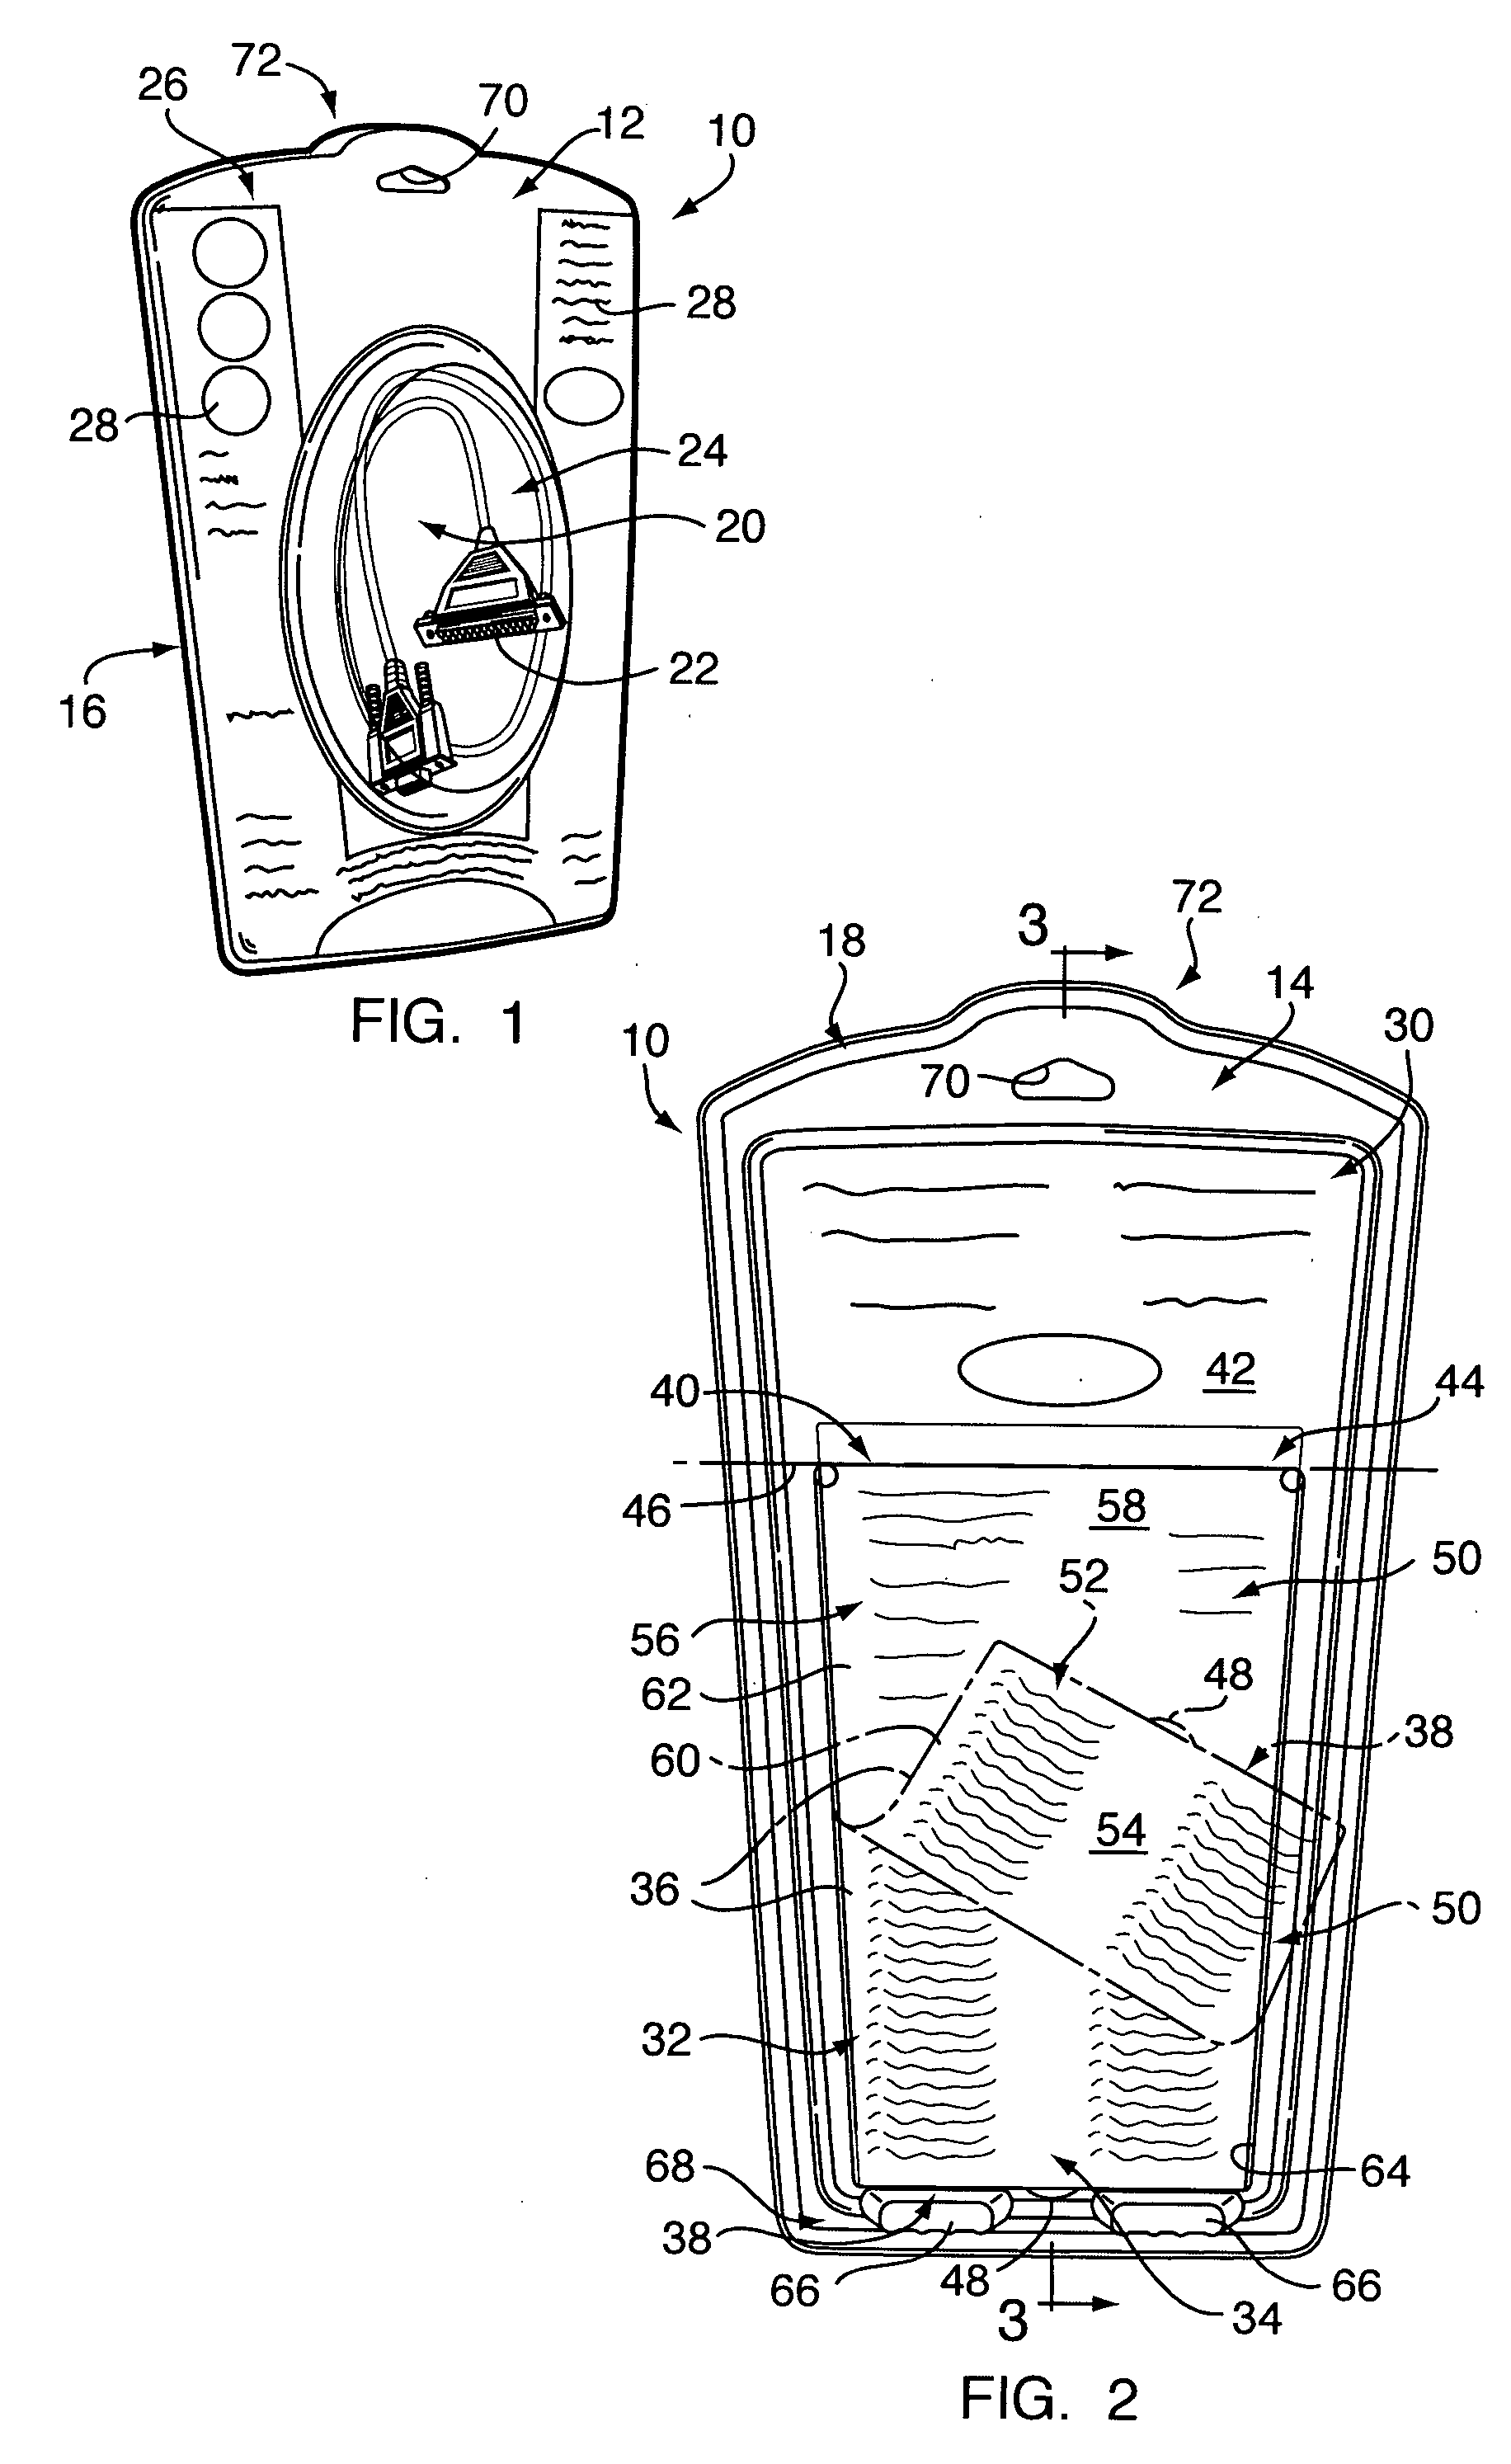 Packaging with increased viewing area